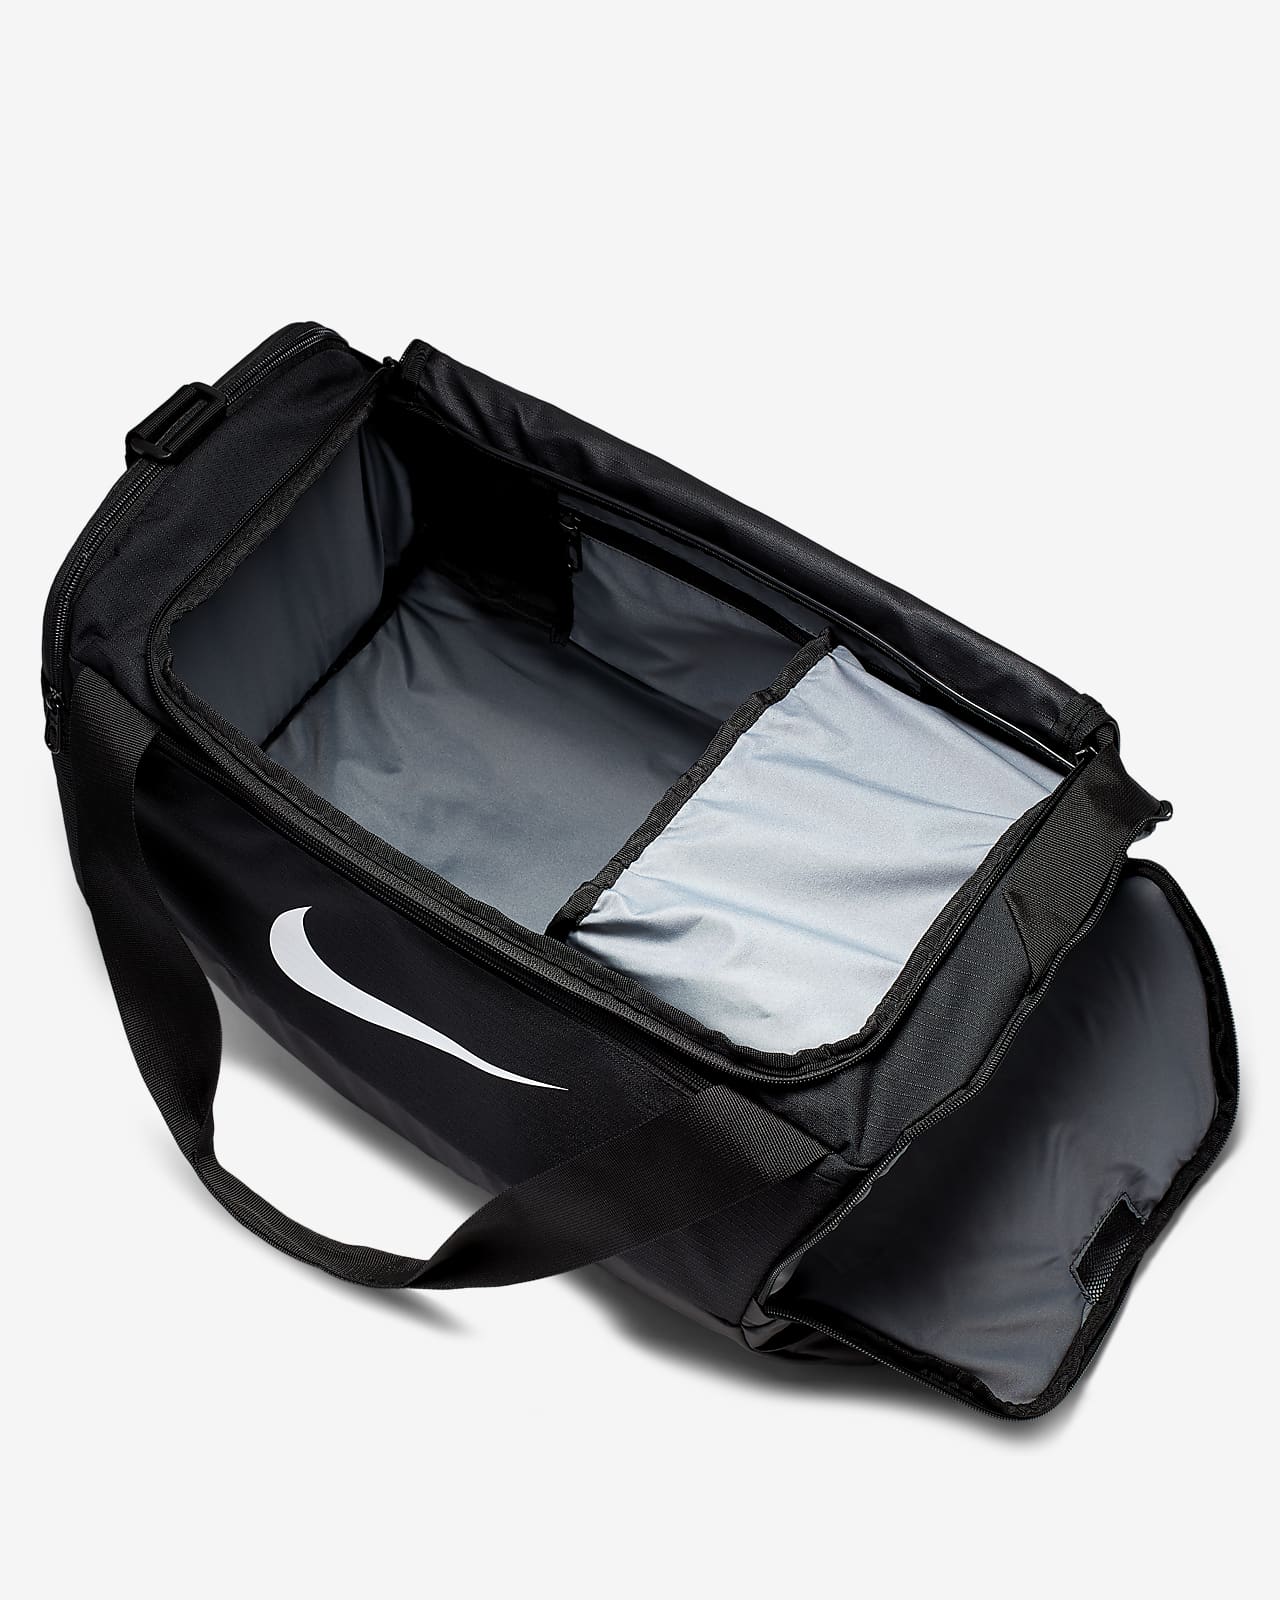 Discover more than 80 small duffel bag best - in.cdgdbentre